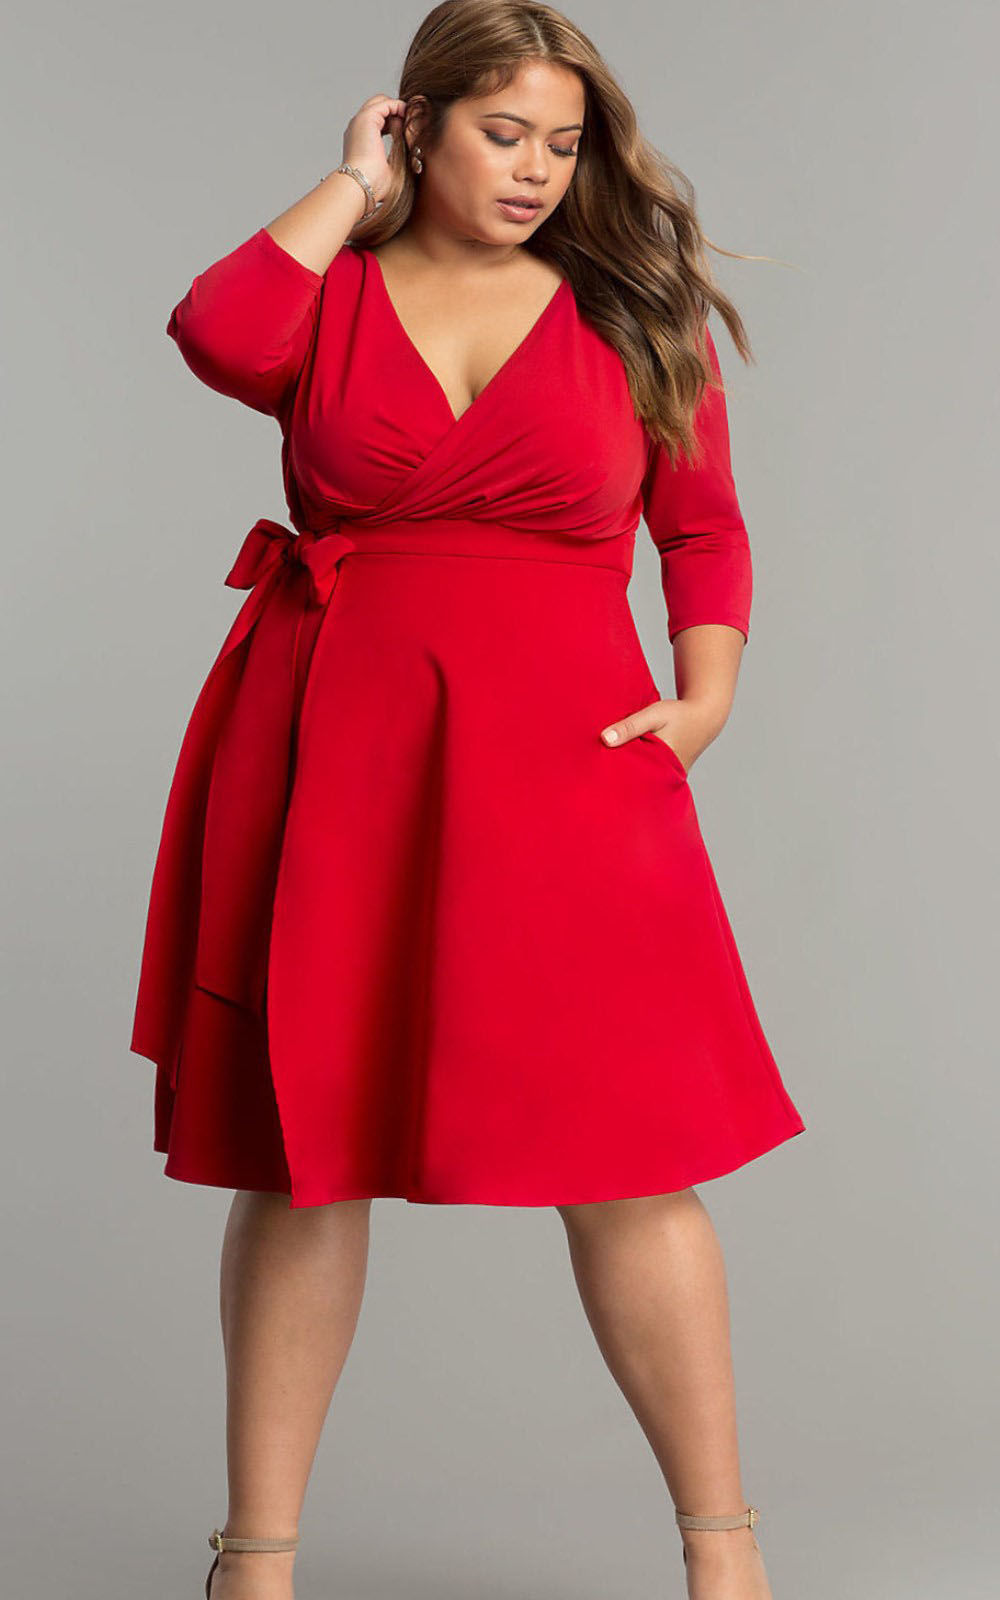 Plus size New Years eve dress 2019 - perfect for curvy women